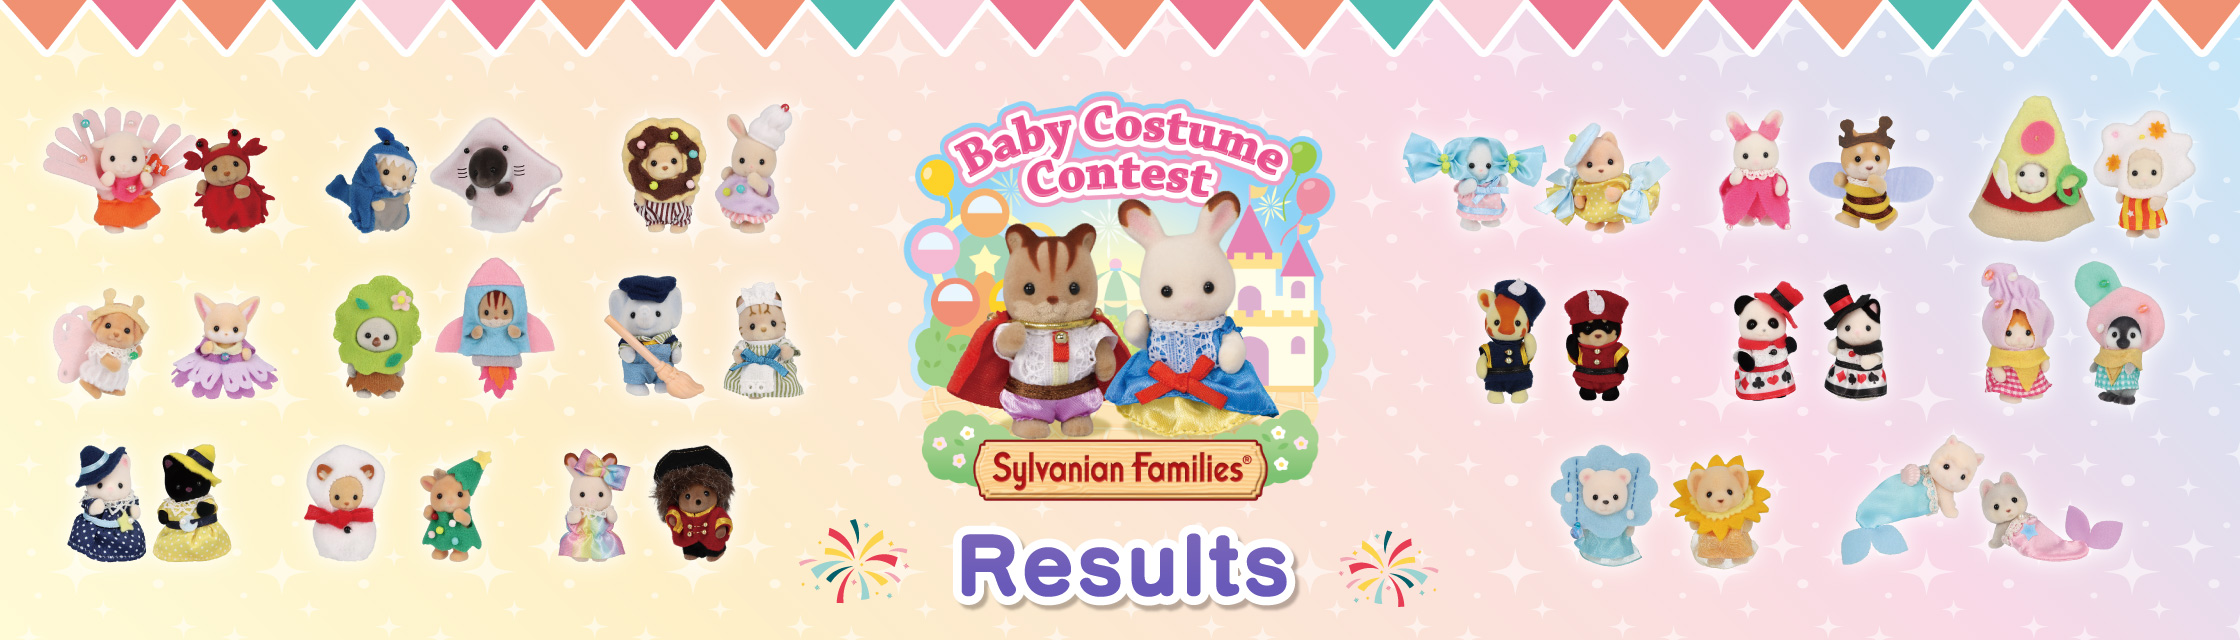  Baby Costume Contest Results